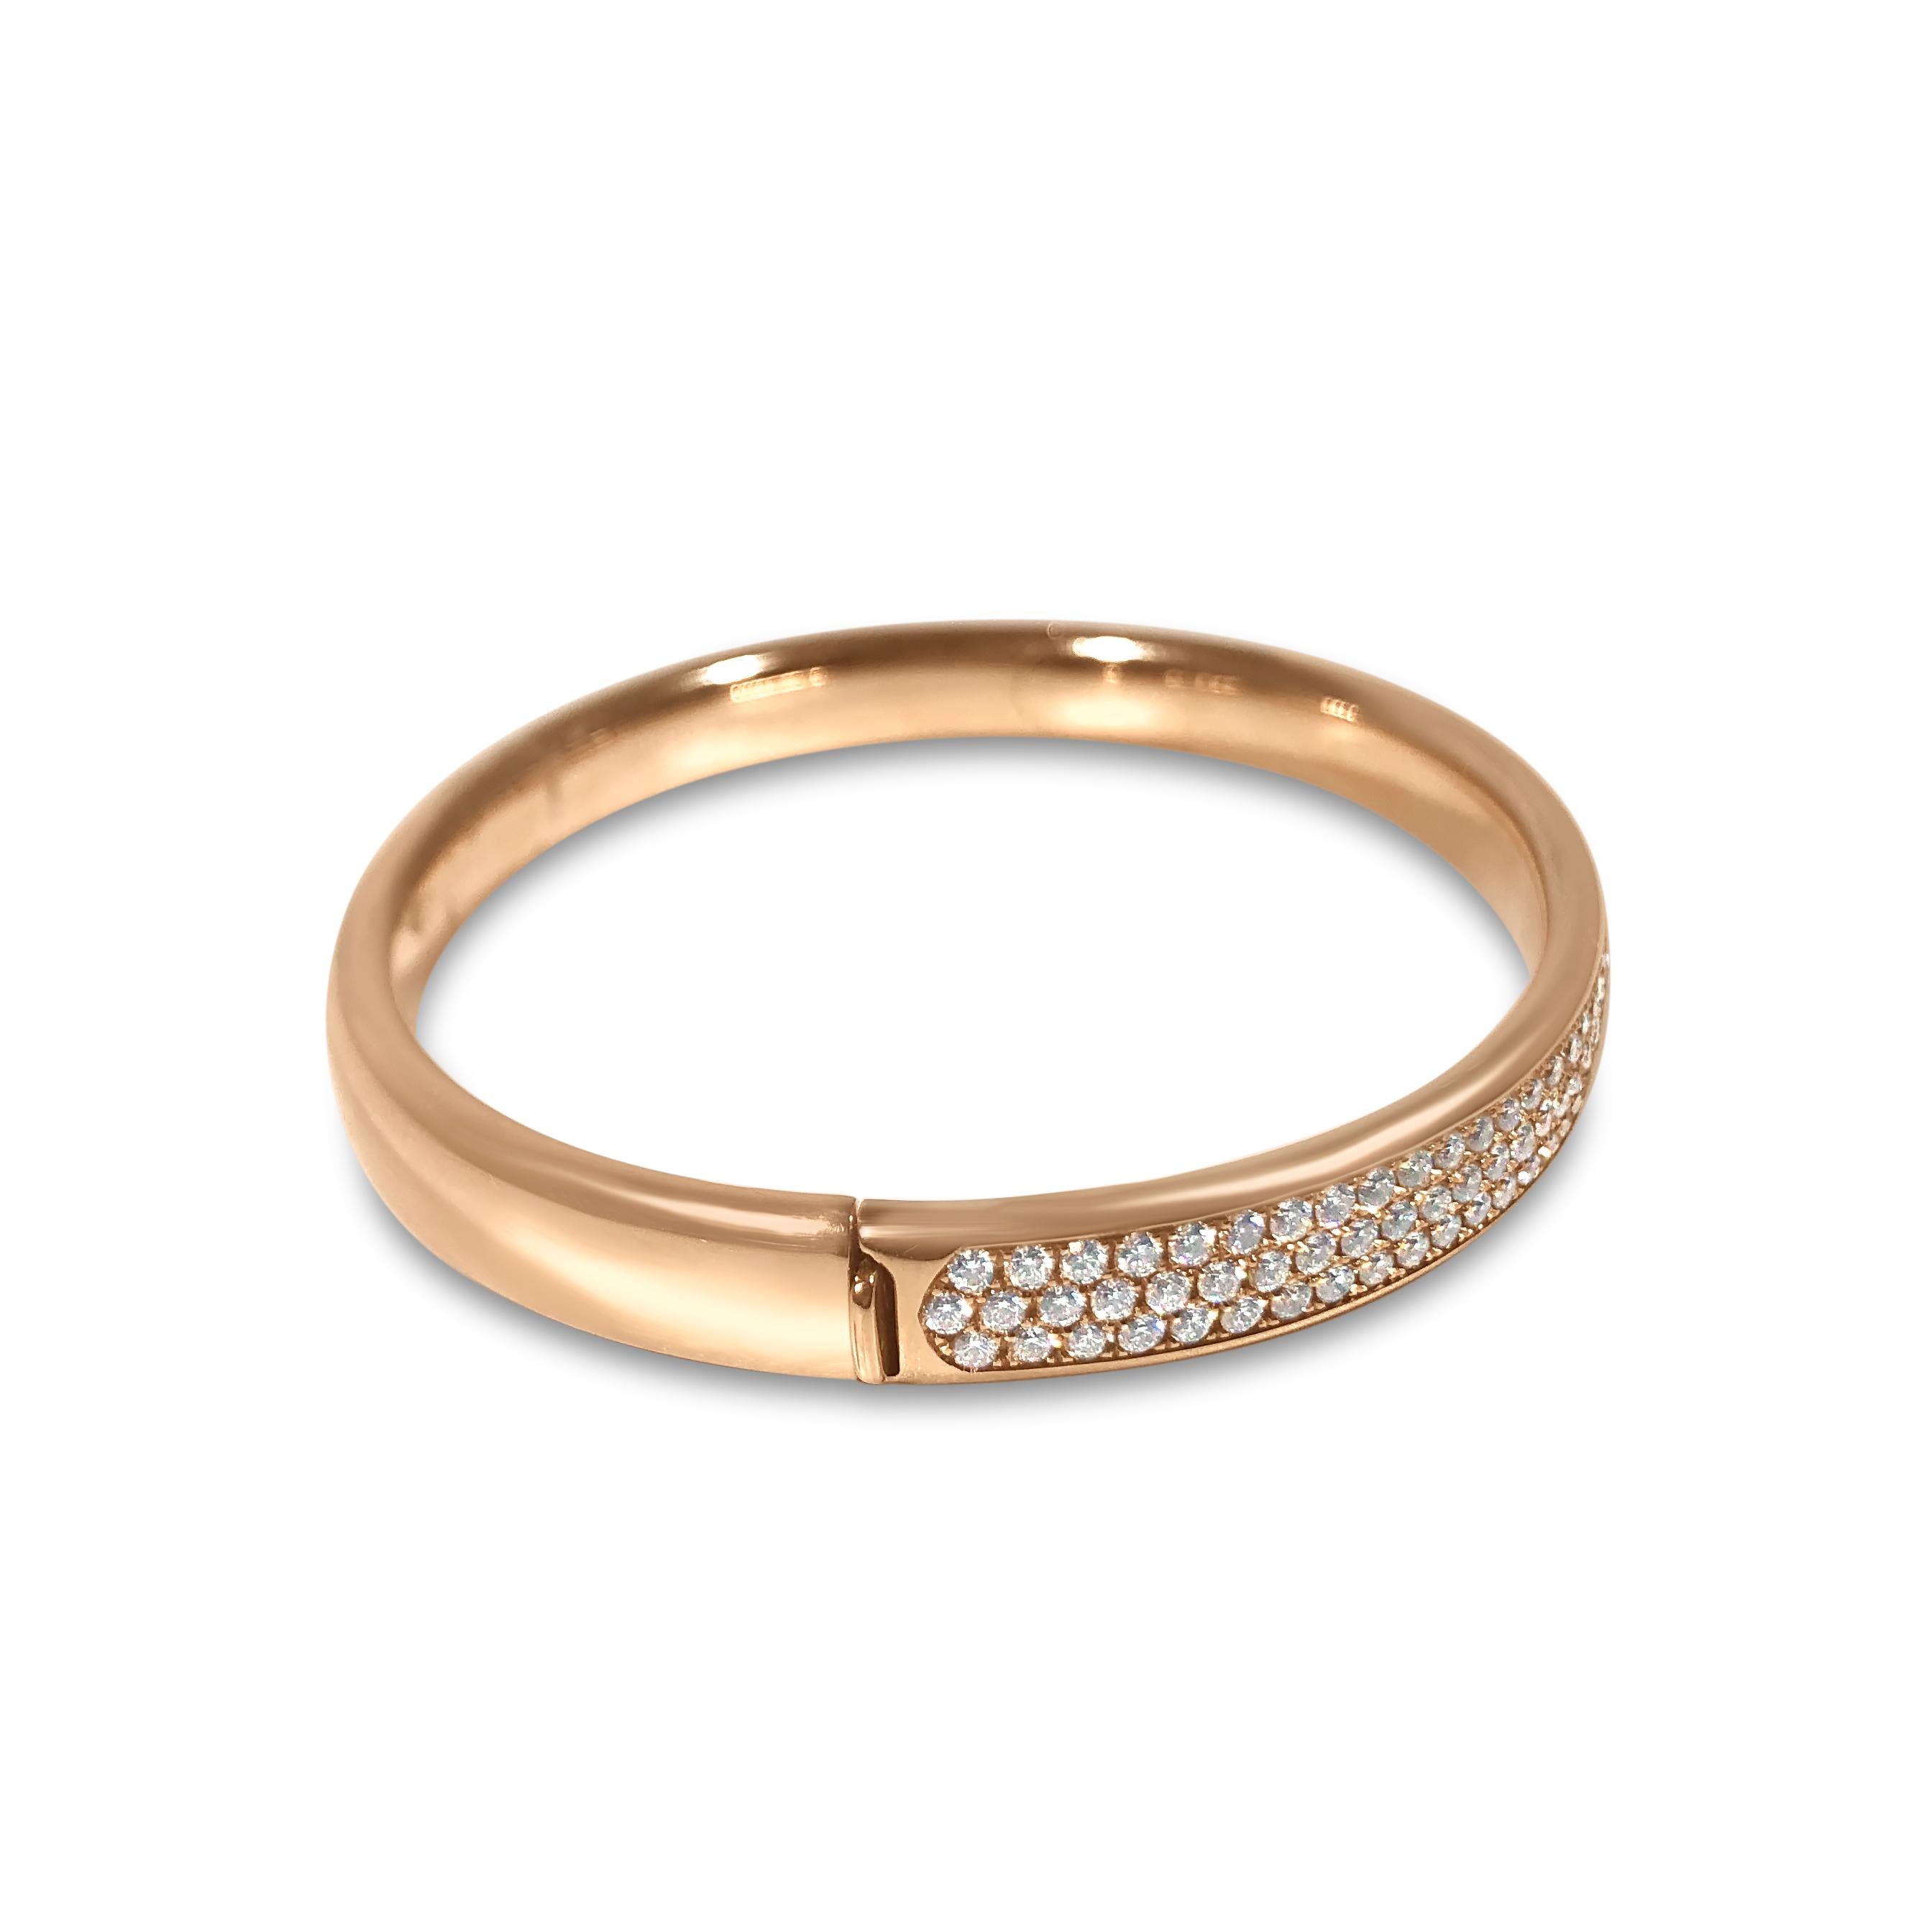 Specifications:
- 18kt Rose Gold
- Handcrafted in Switzerland
- Customization, made-to-order available in precious stone type, precious metal type, and size 
 (prices may vary)
- Style #: ATE 495 ROSE PAVE BR.2.93

All items on the site are in stock